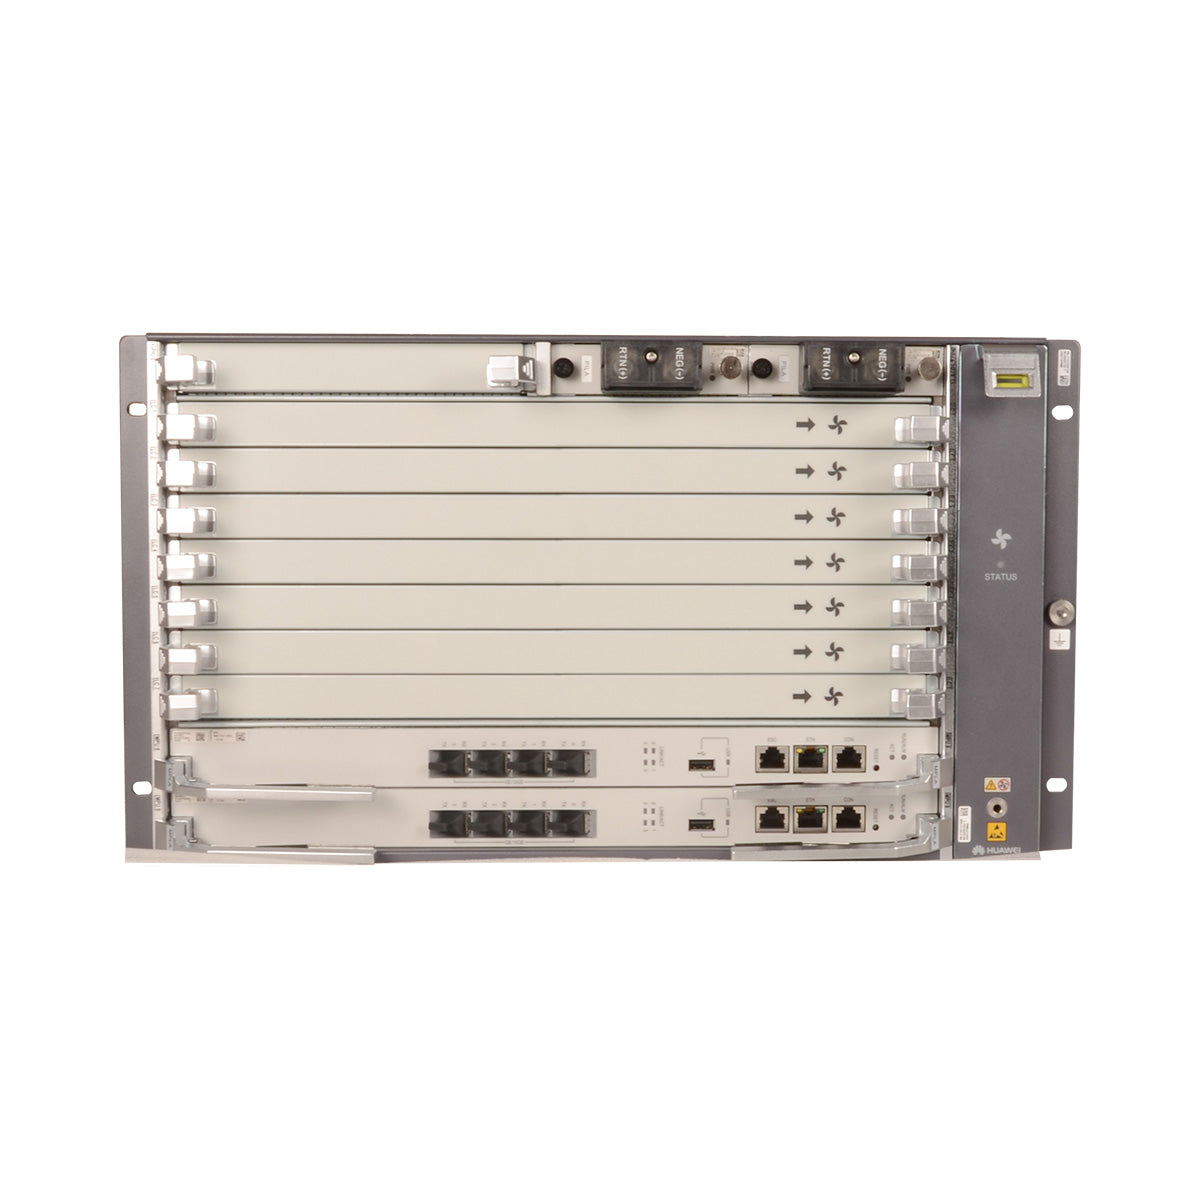 Huawei MA5800-X7 OLT 19inch Chassis